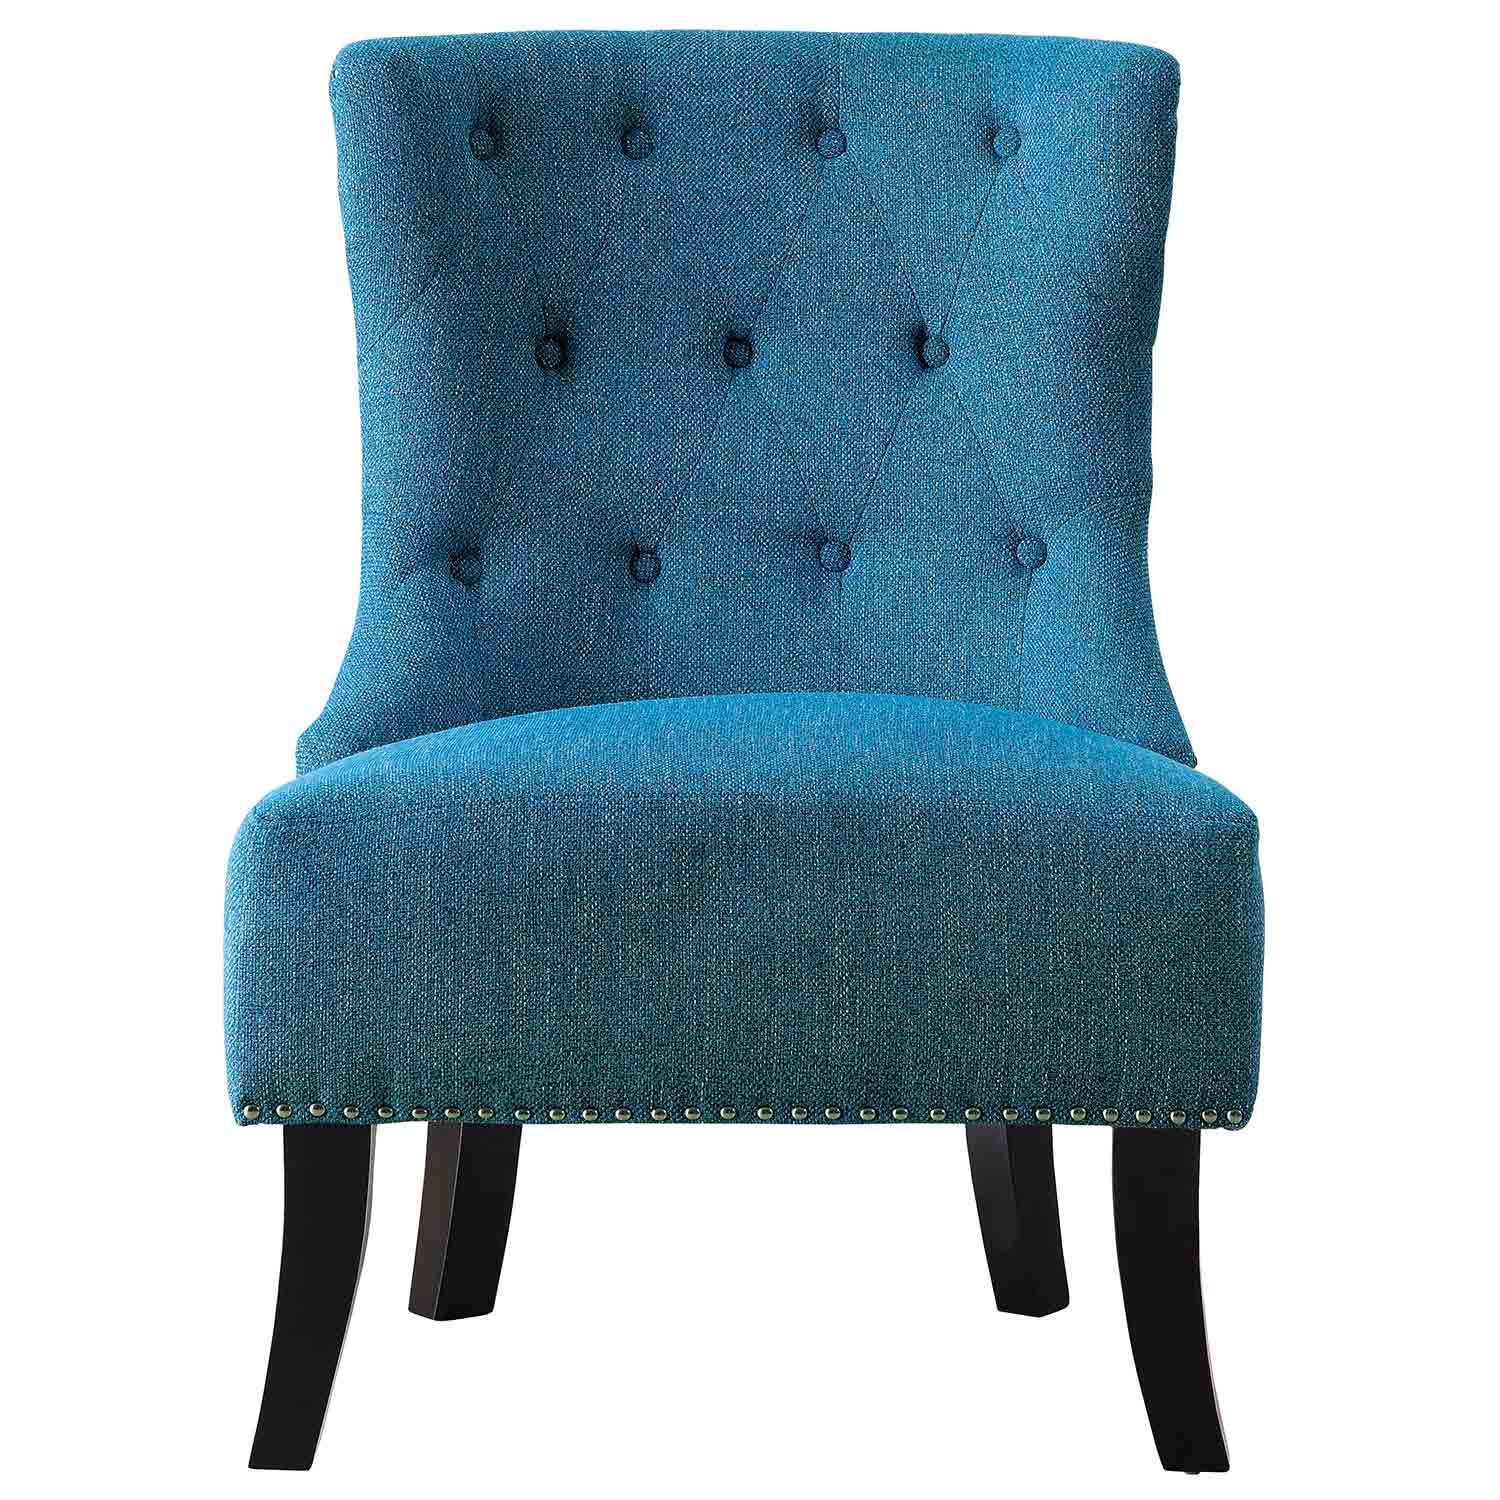 Homelegance Paighton Accent Chair - Blue